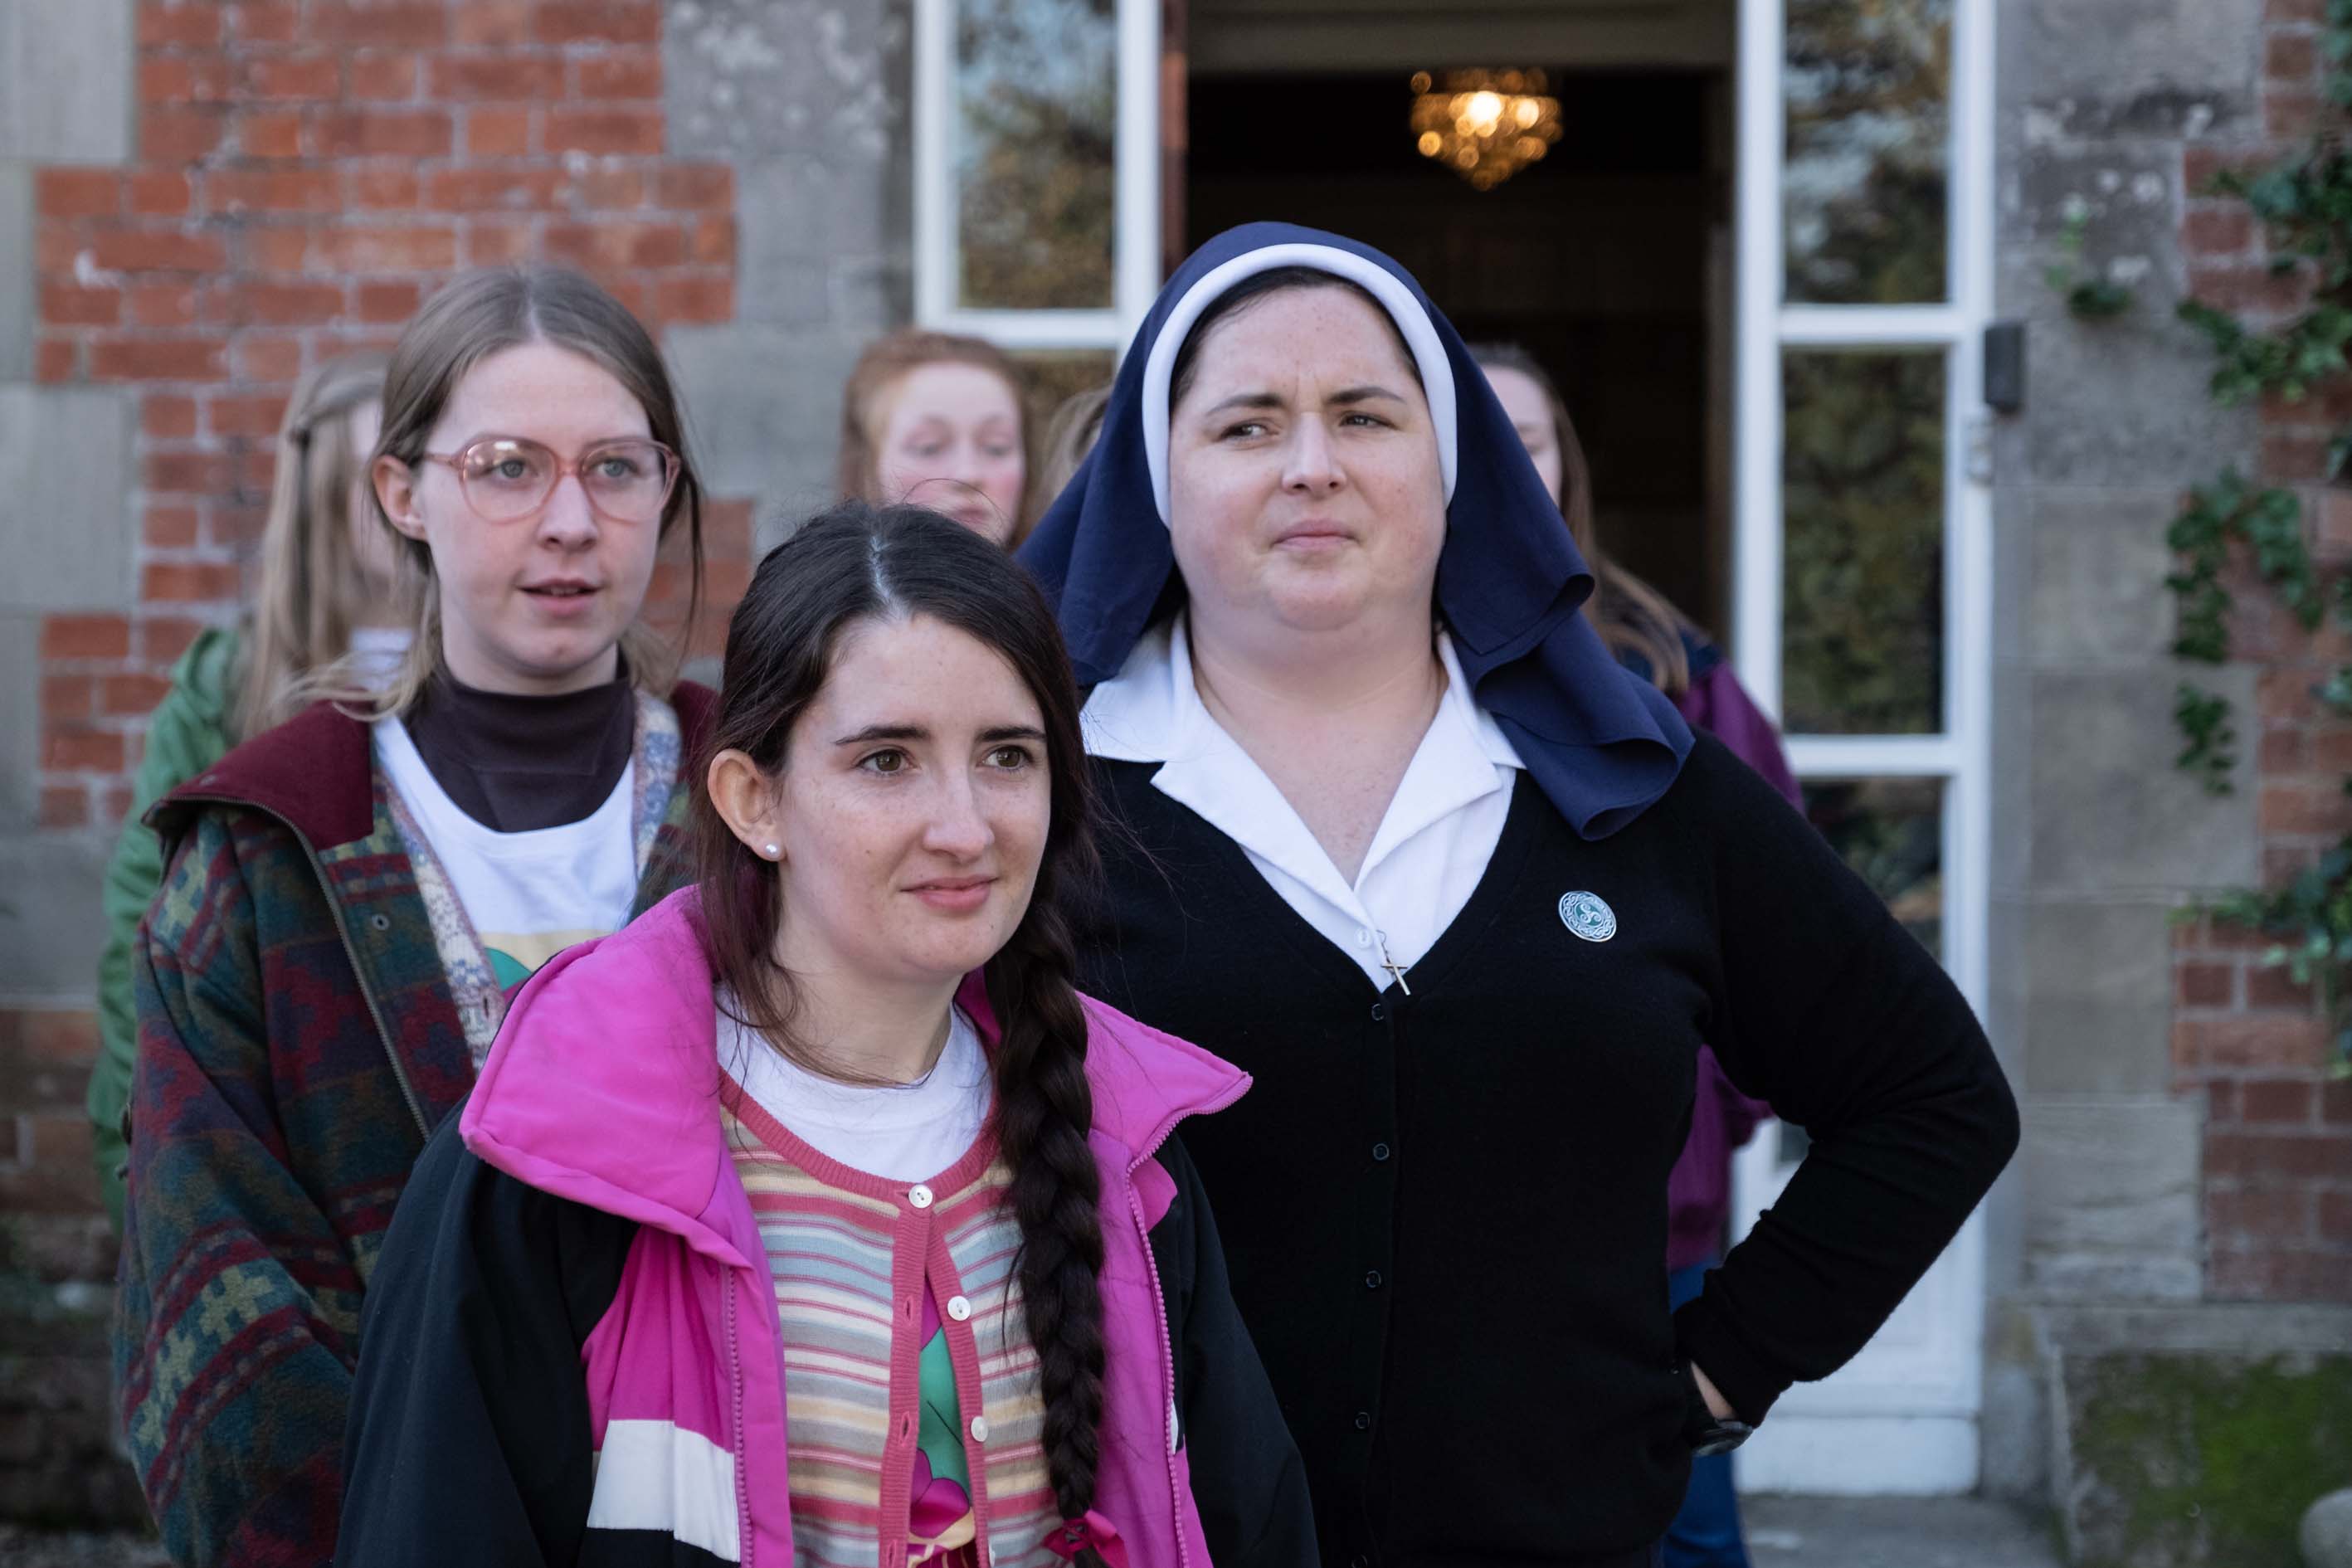 Leah O'Rourke, Siobhán McSweeney, and Beccy Henderson in Derry Girls (2018)